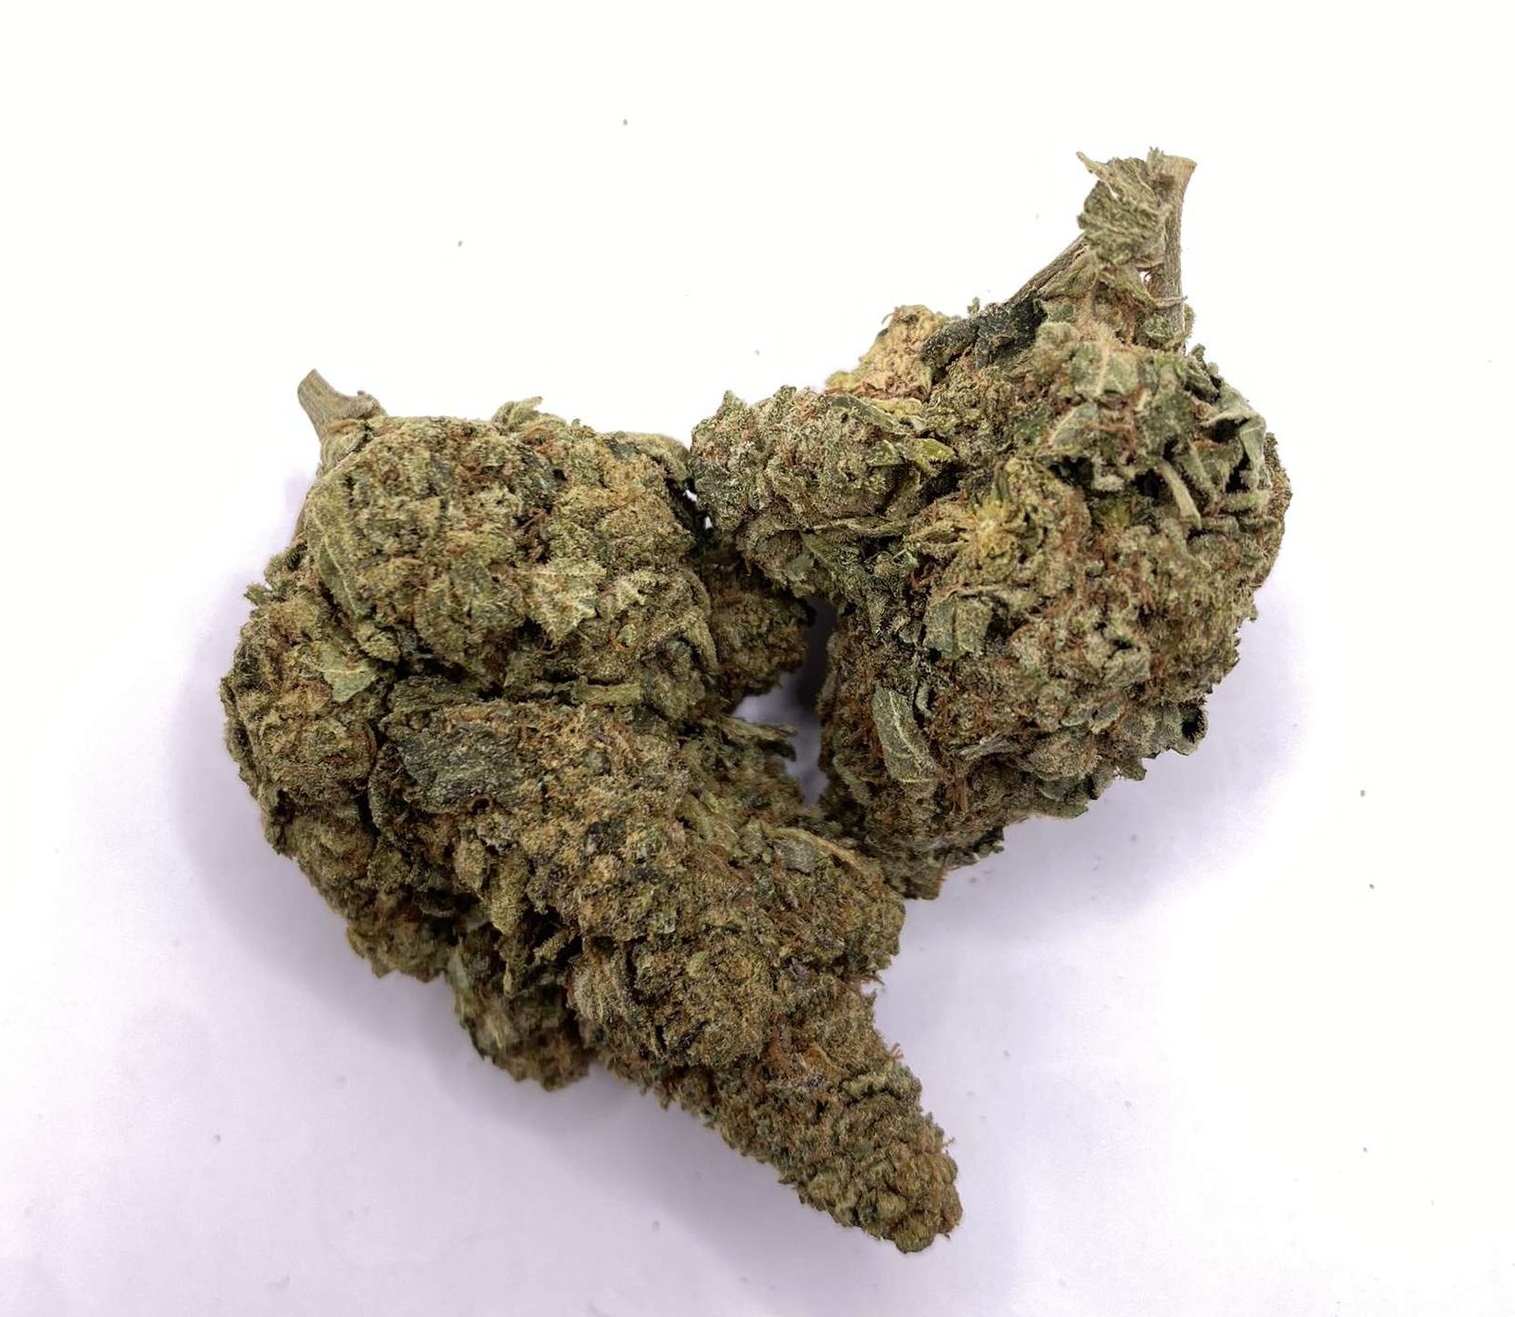 Gas Grass HFX, Cannabis, CBD, Flowers, Strains, Concentrates, Cigars, Mushrooms, Capsules, Edibles, Candies, Gummies, Accessories, Weekly Specials, Indica, Hybrid,  Premium buds, Luxury Buds,  Cheap Oz, Half Oz, Hemp, Medical, Oz, Happy, Relaxing, Energy, Fresh